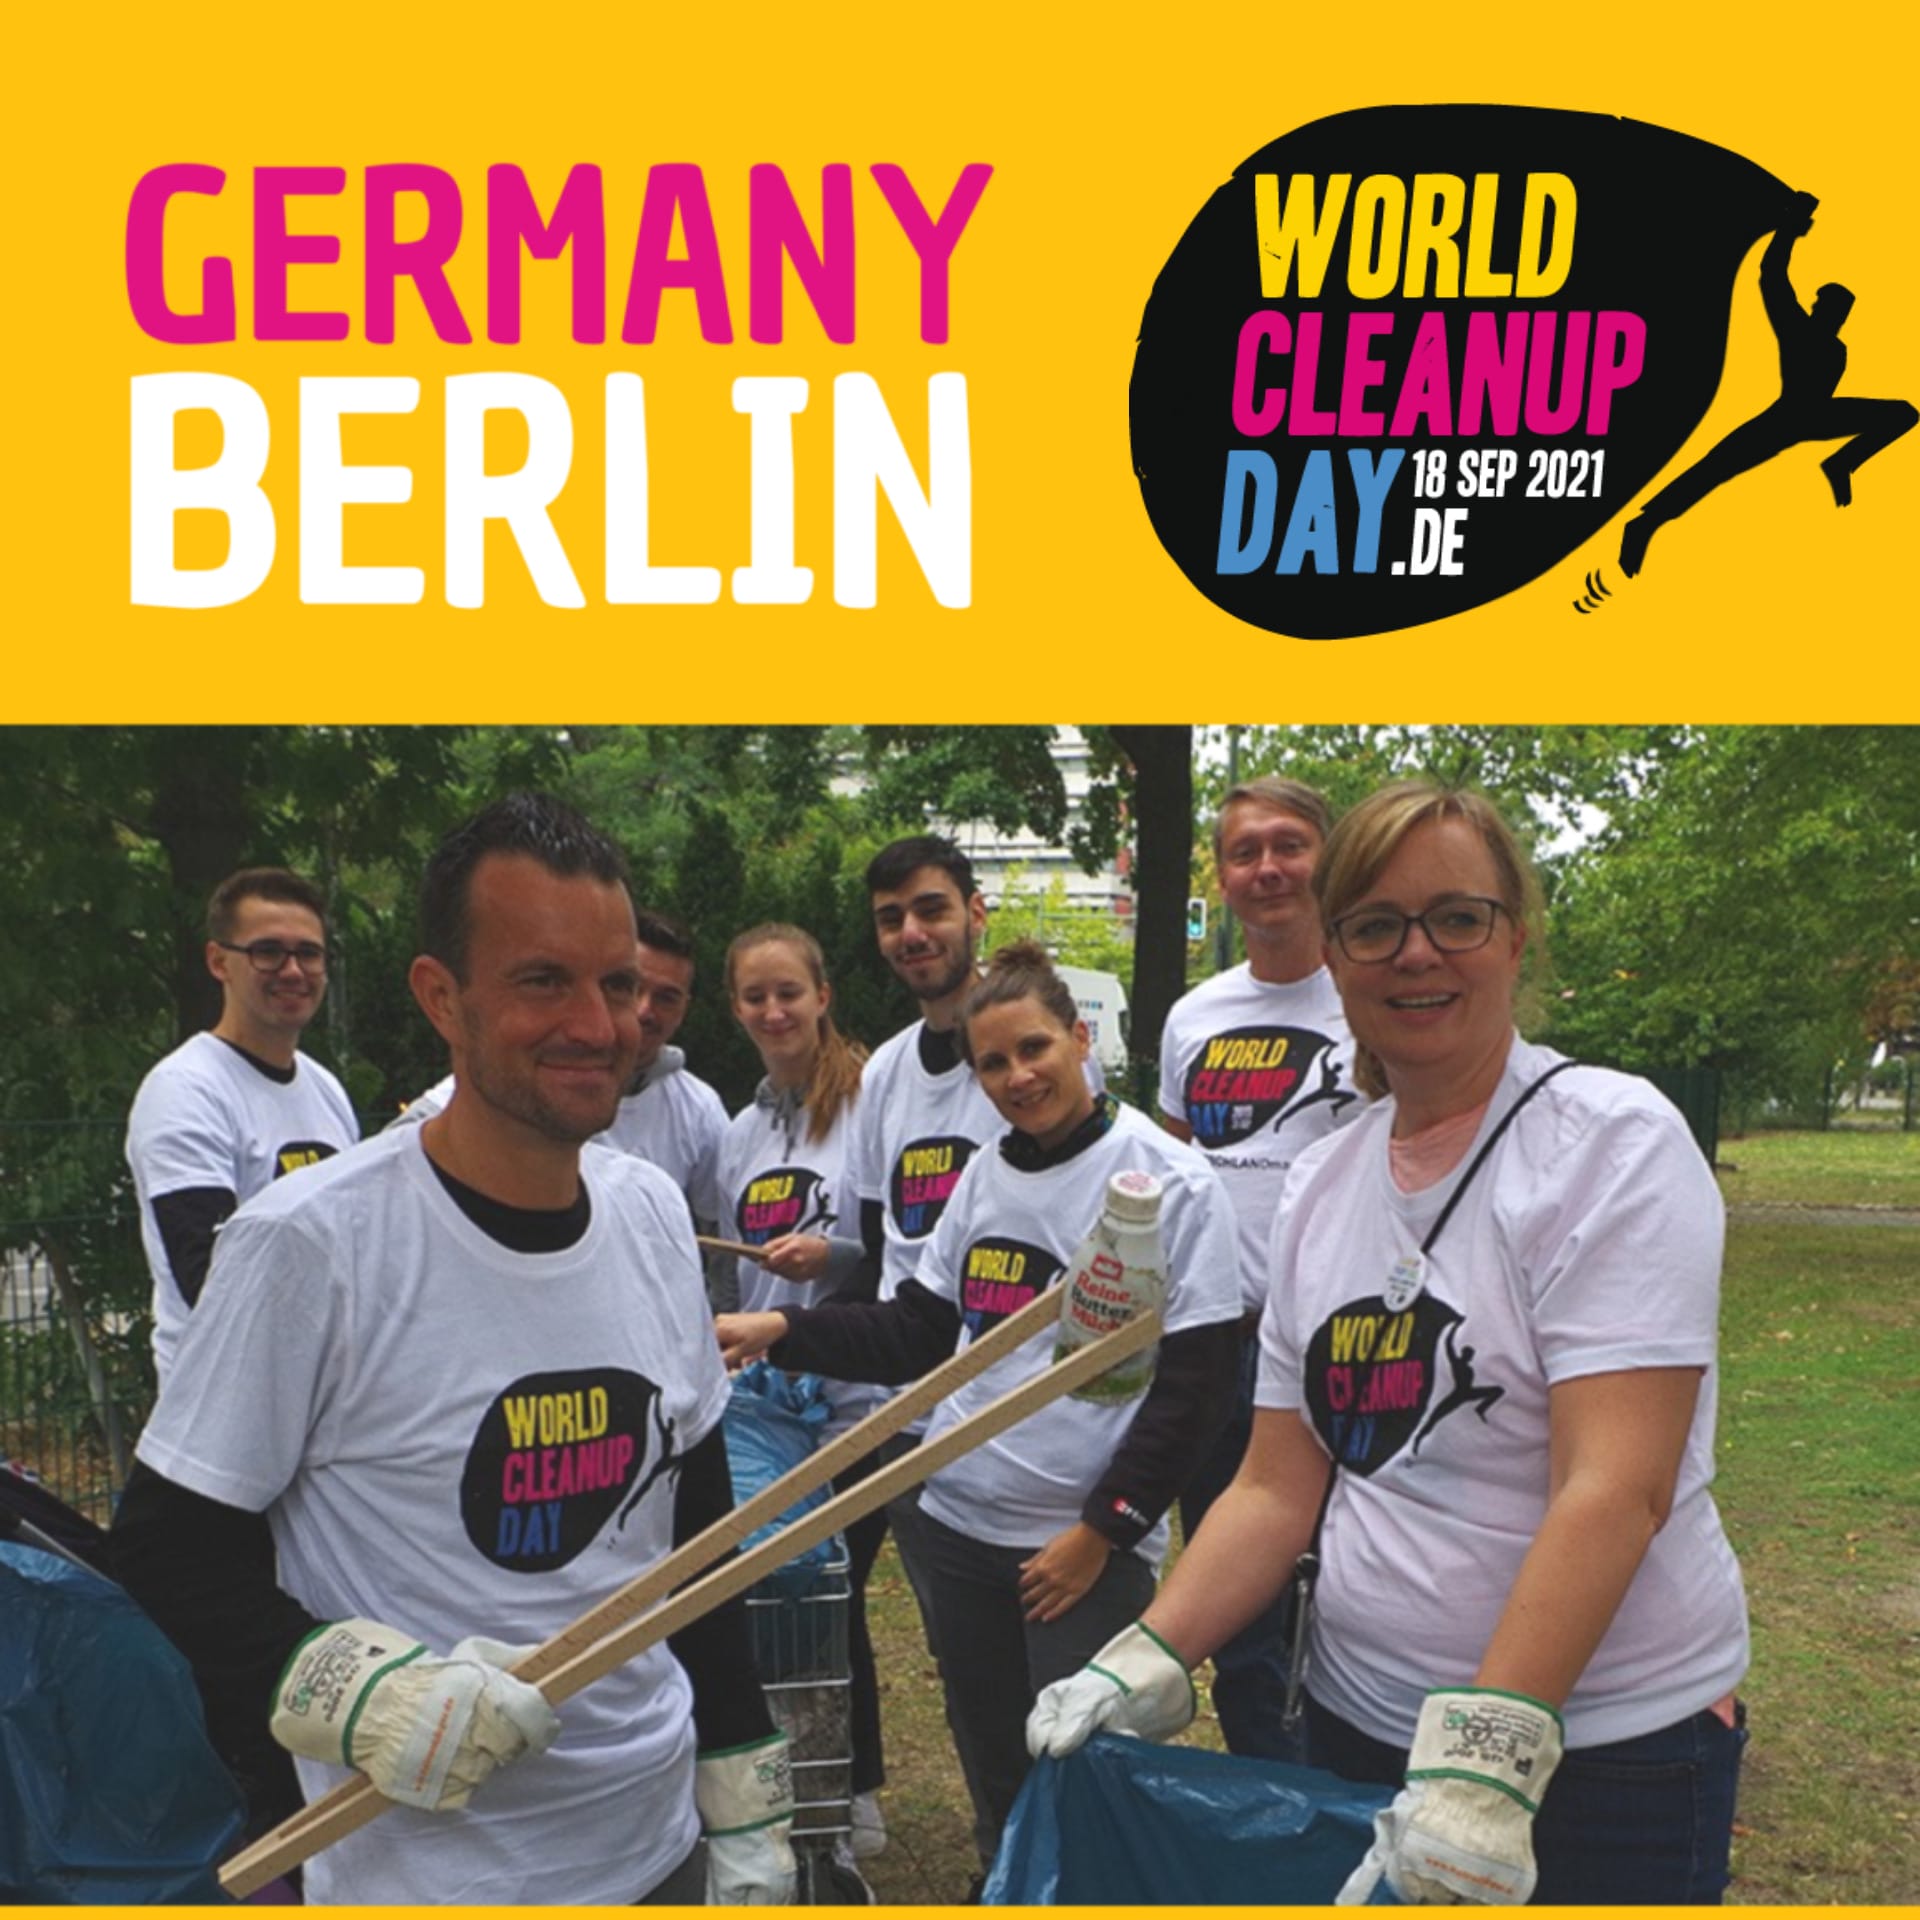 LandGANG World Cleanup Day (Berlin) World Cleanup Day 20. Sep